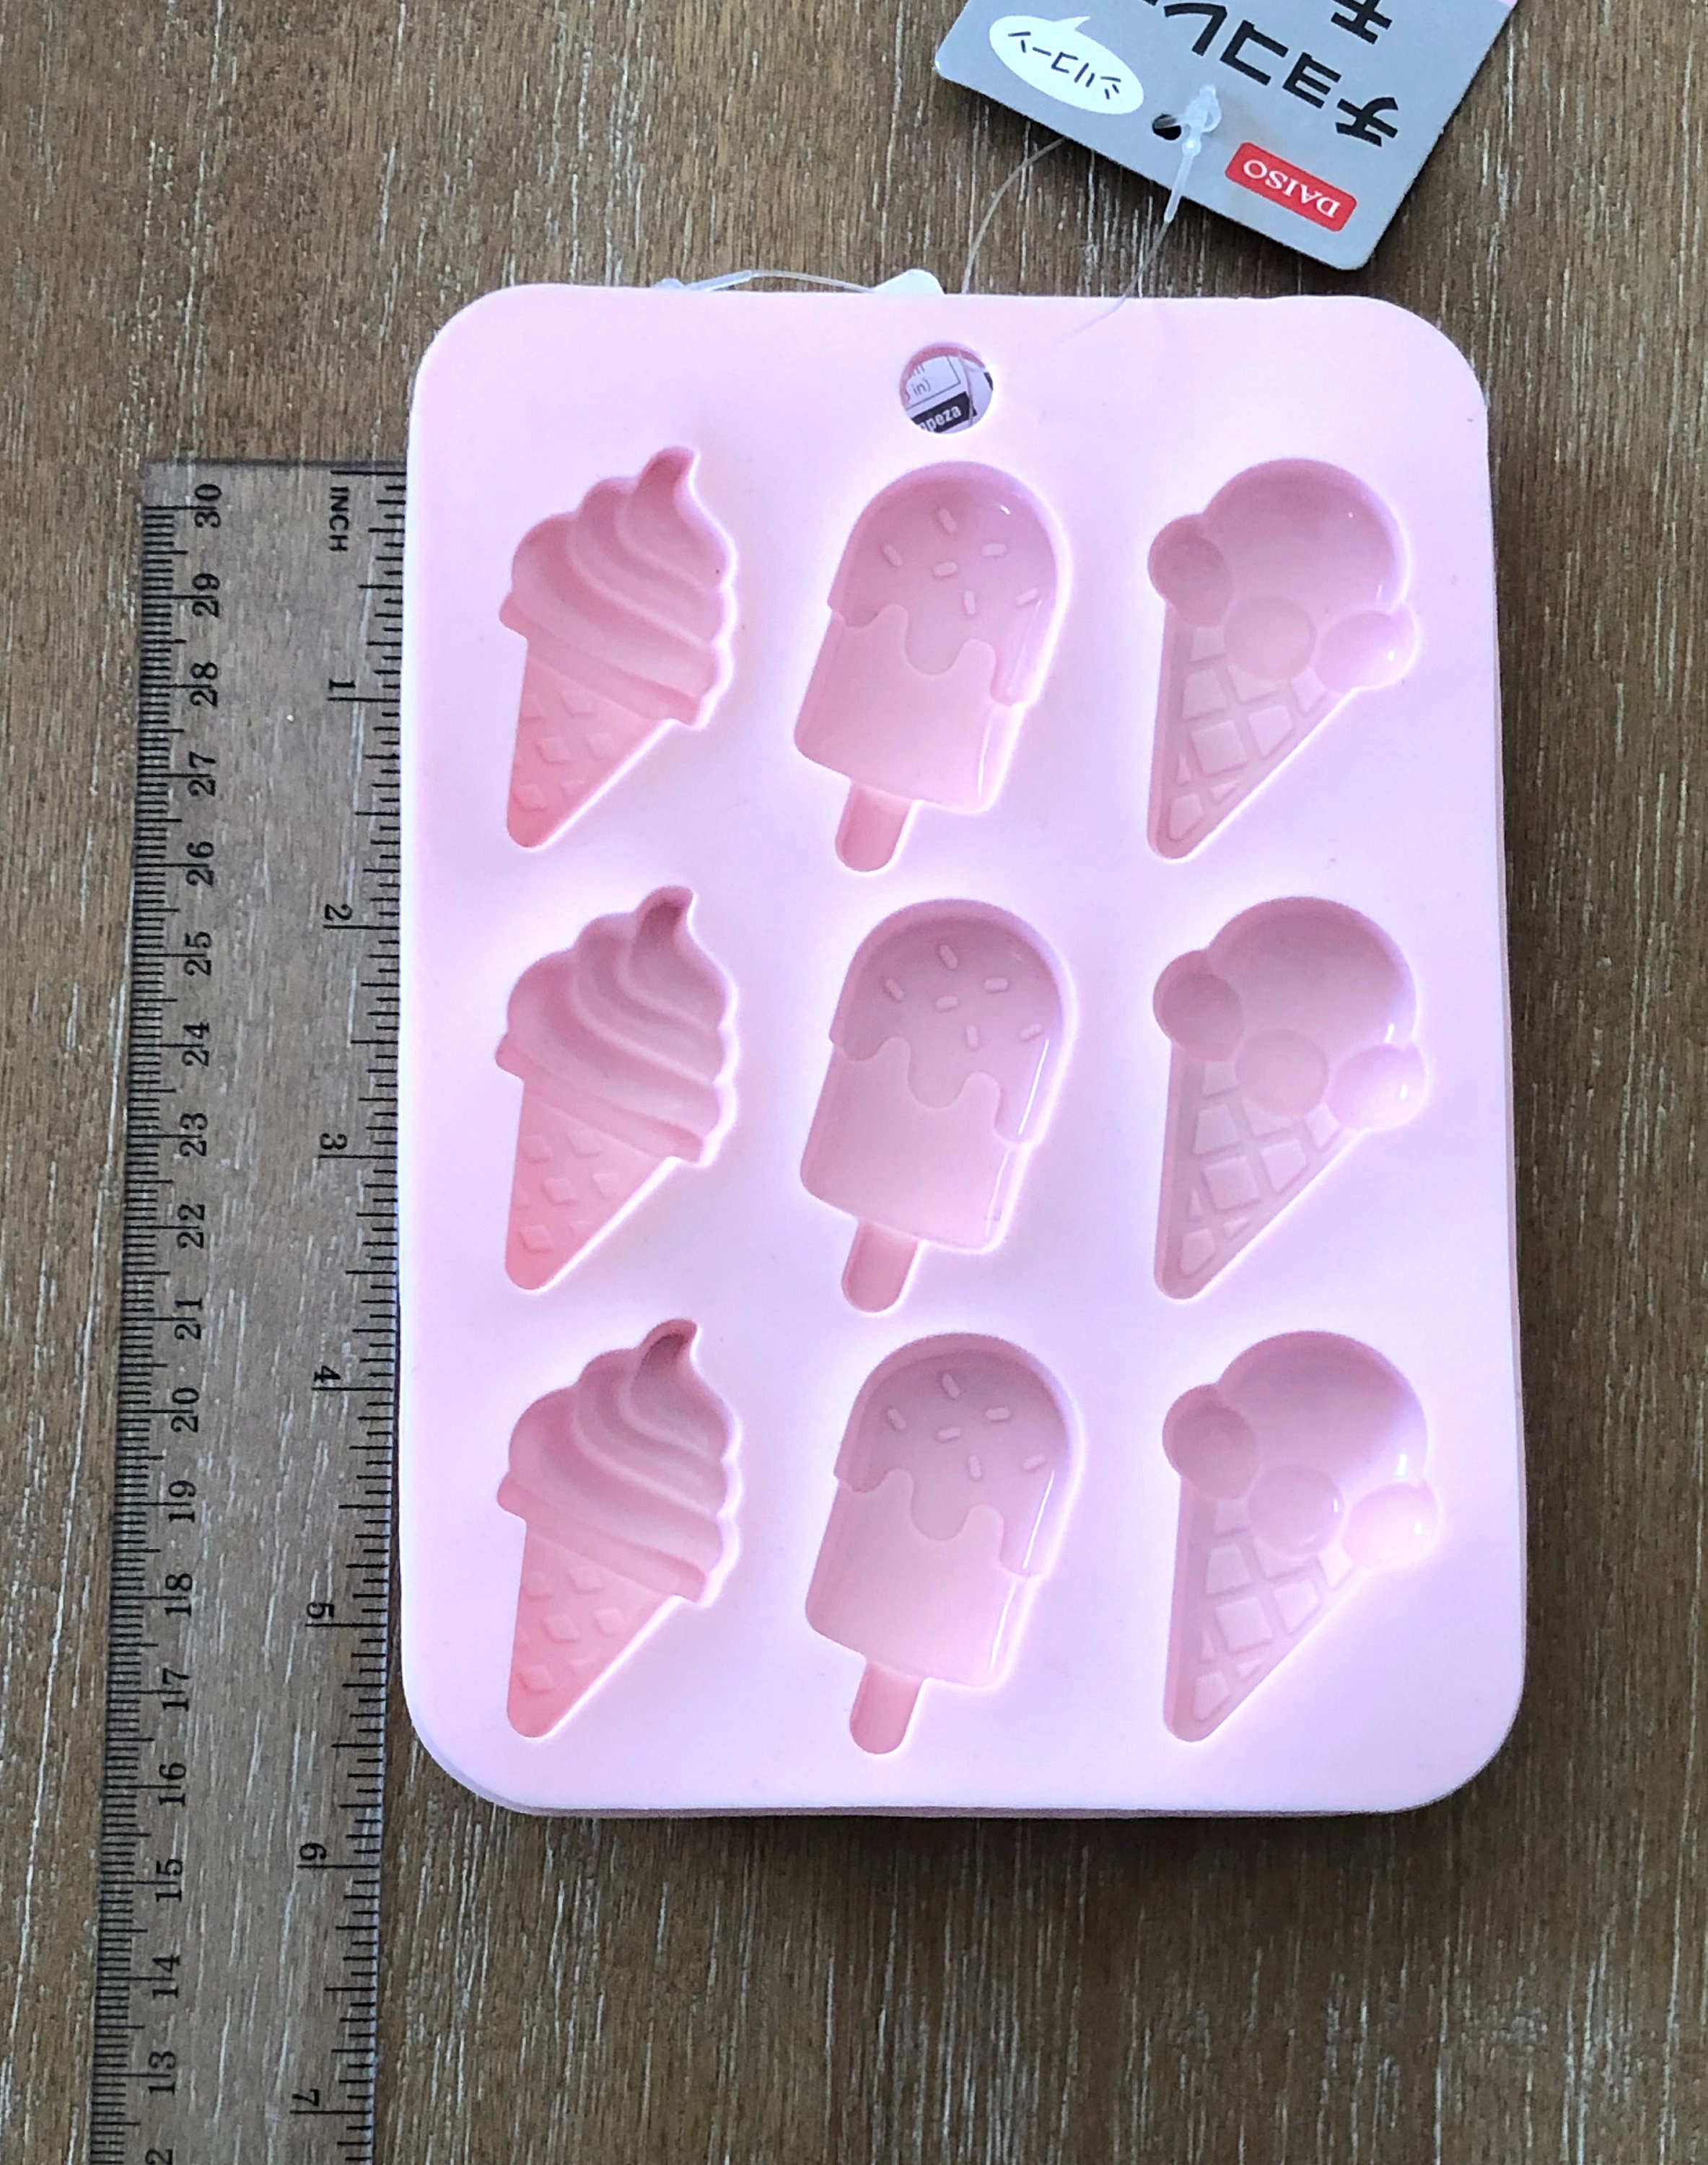 UV Resin Mold (7 Cavity), Tag Silicone Mold, Flexible Square Mold, MiniatureSweet, Kawaii Resin Crafts, Decoden Cabochons Supplies